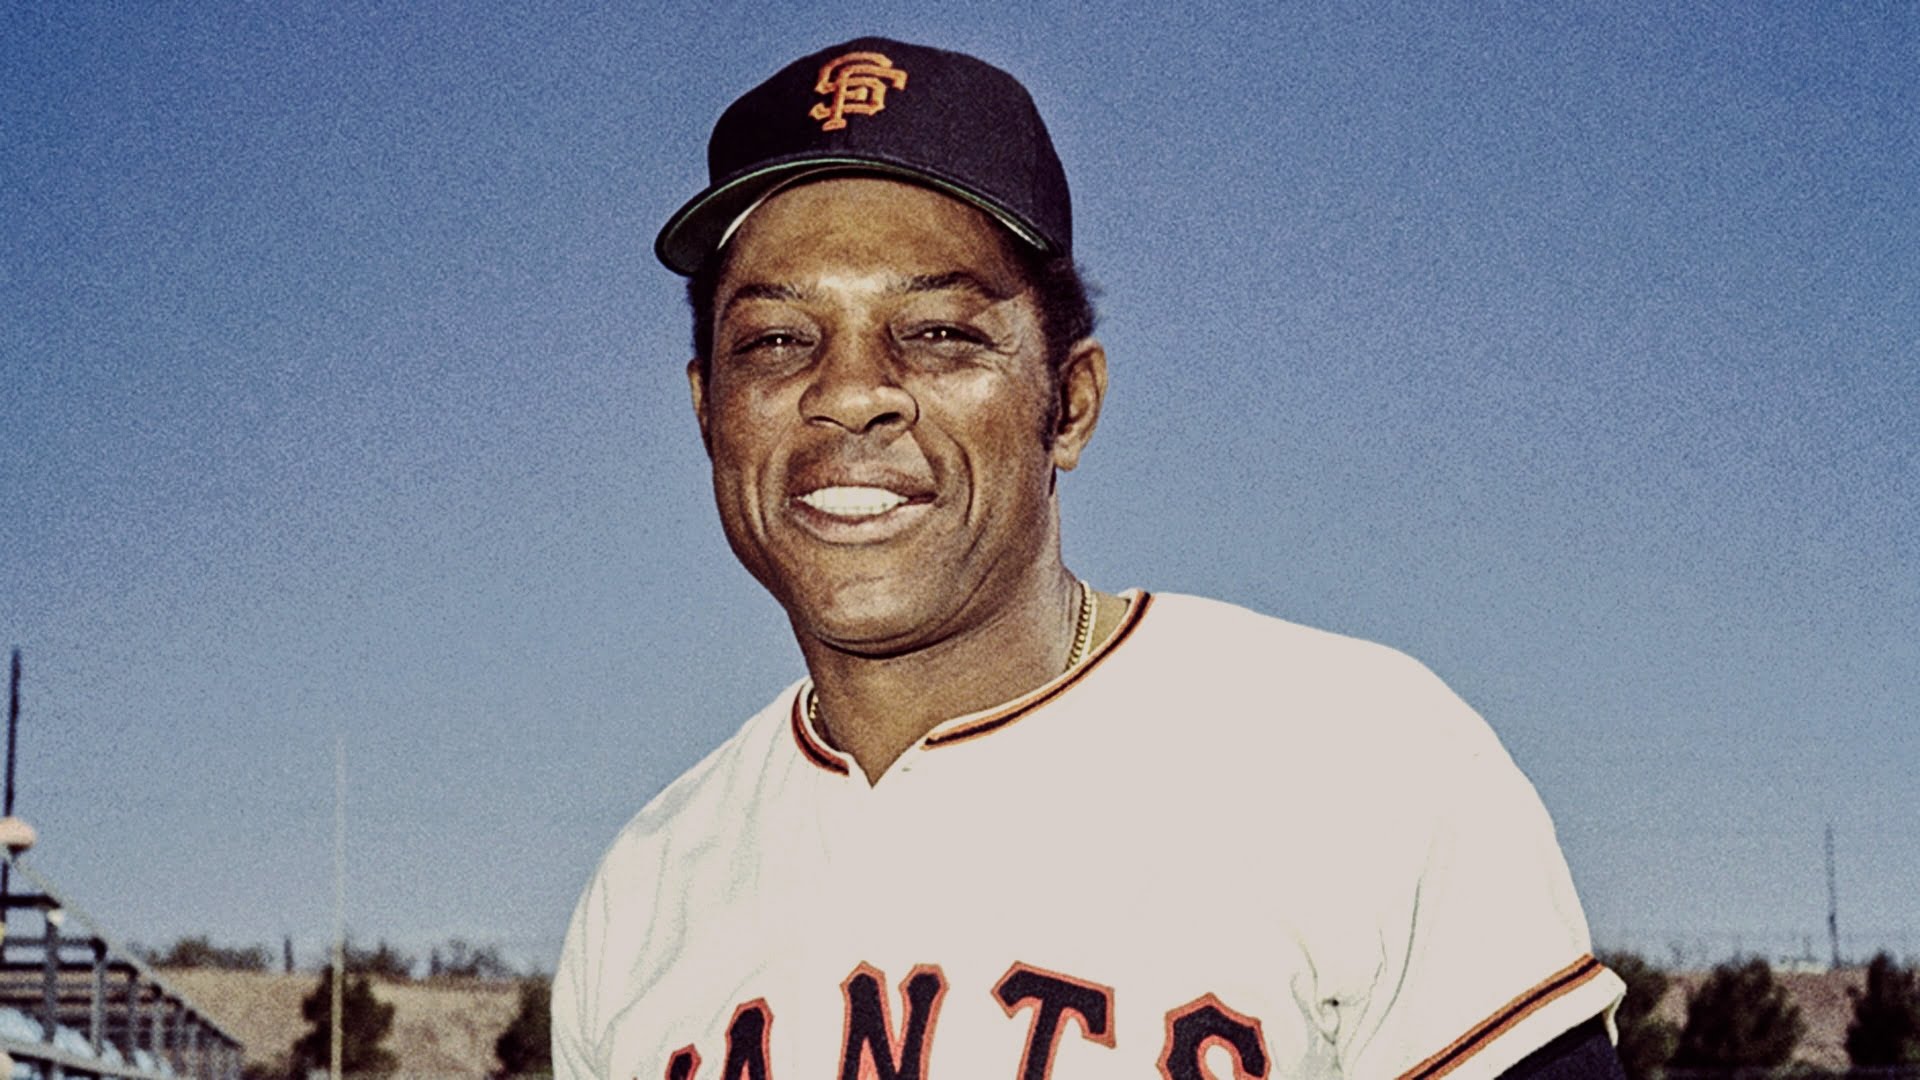 Willie Mays: The Say Hey Kid, Hall of Famer, Giant1920 x 1080